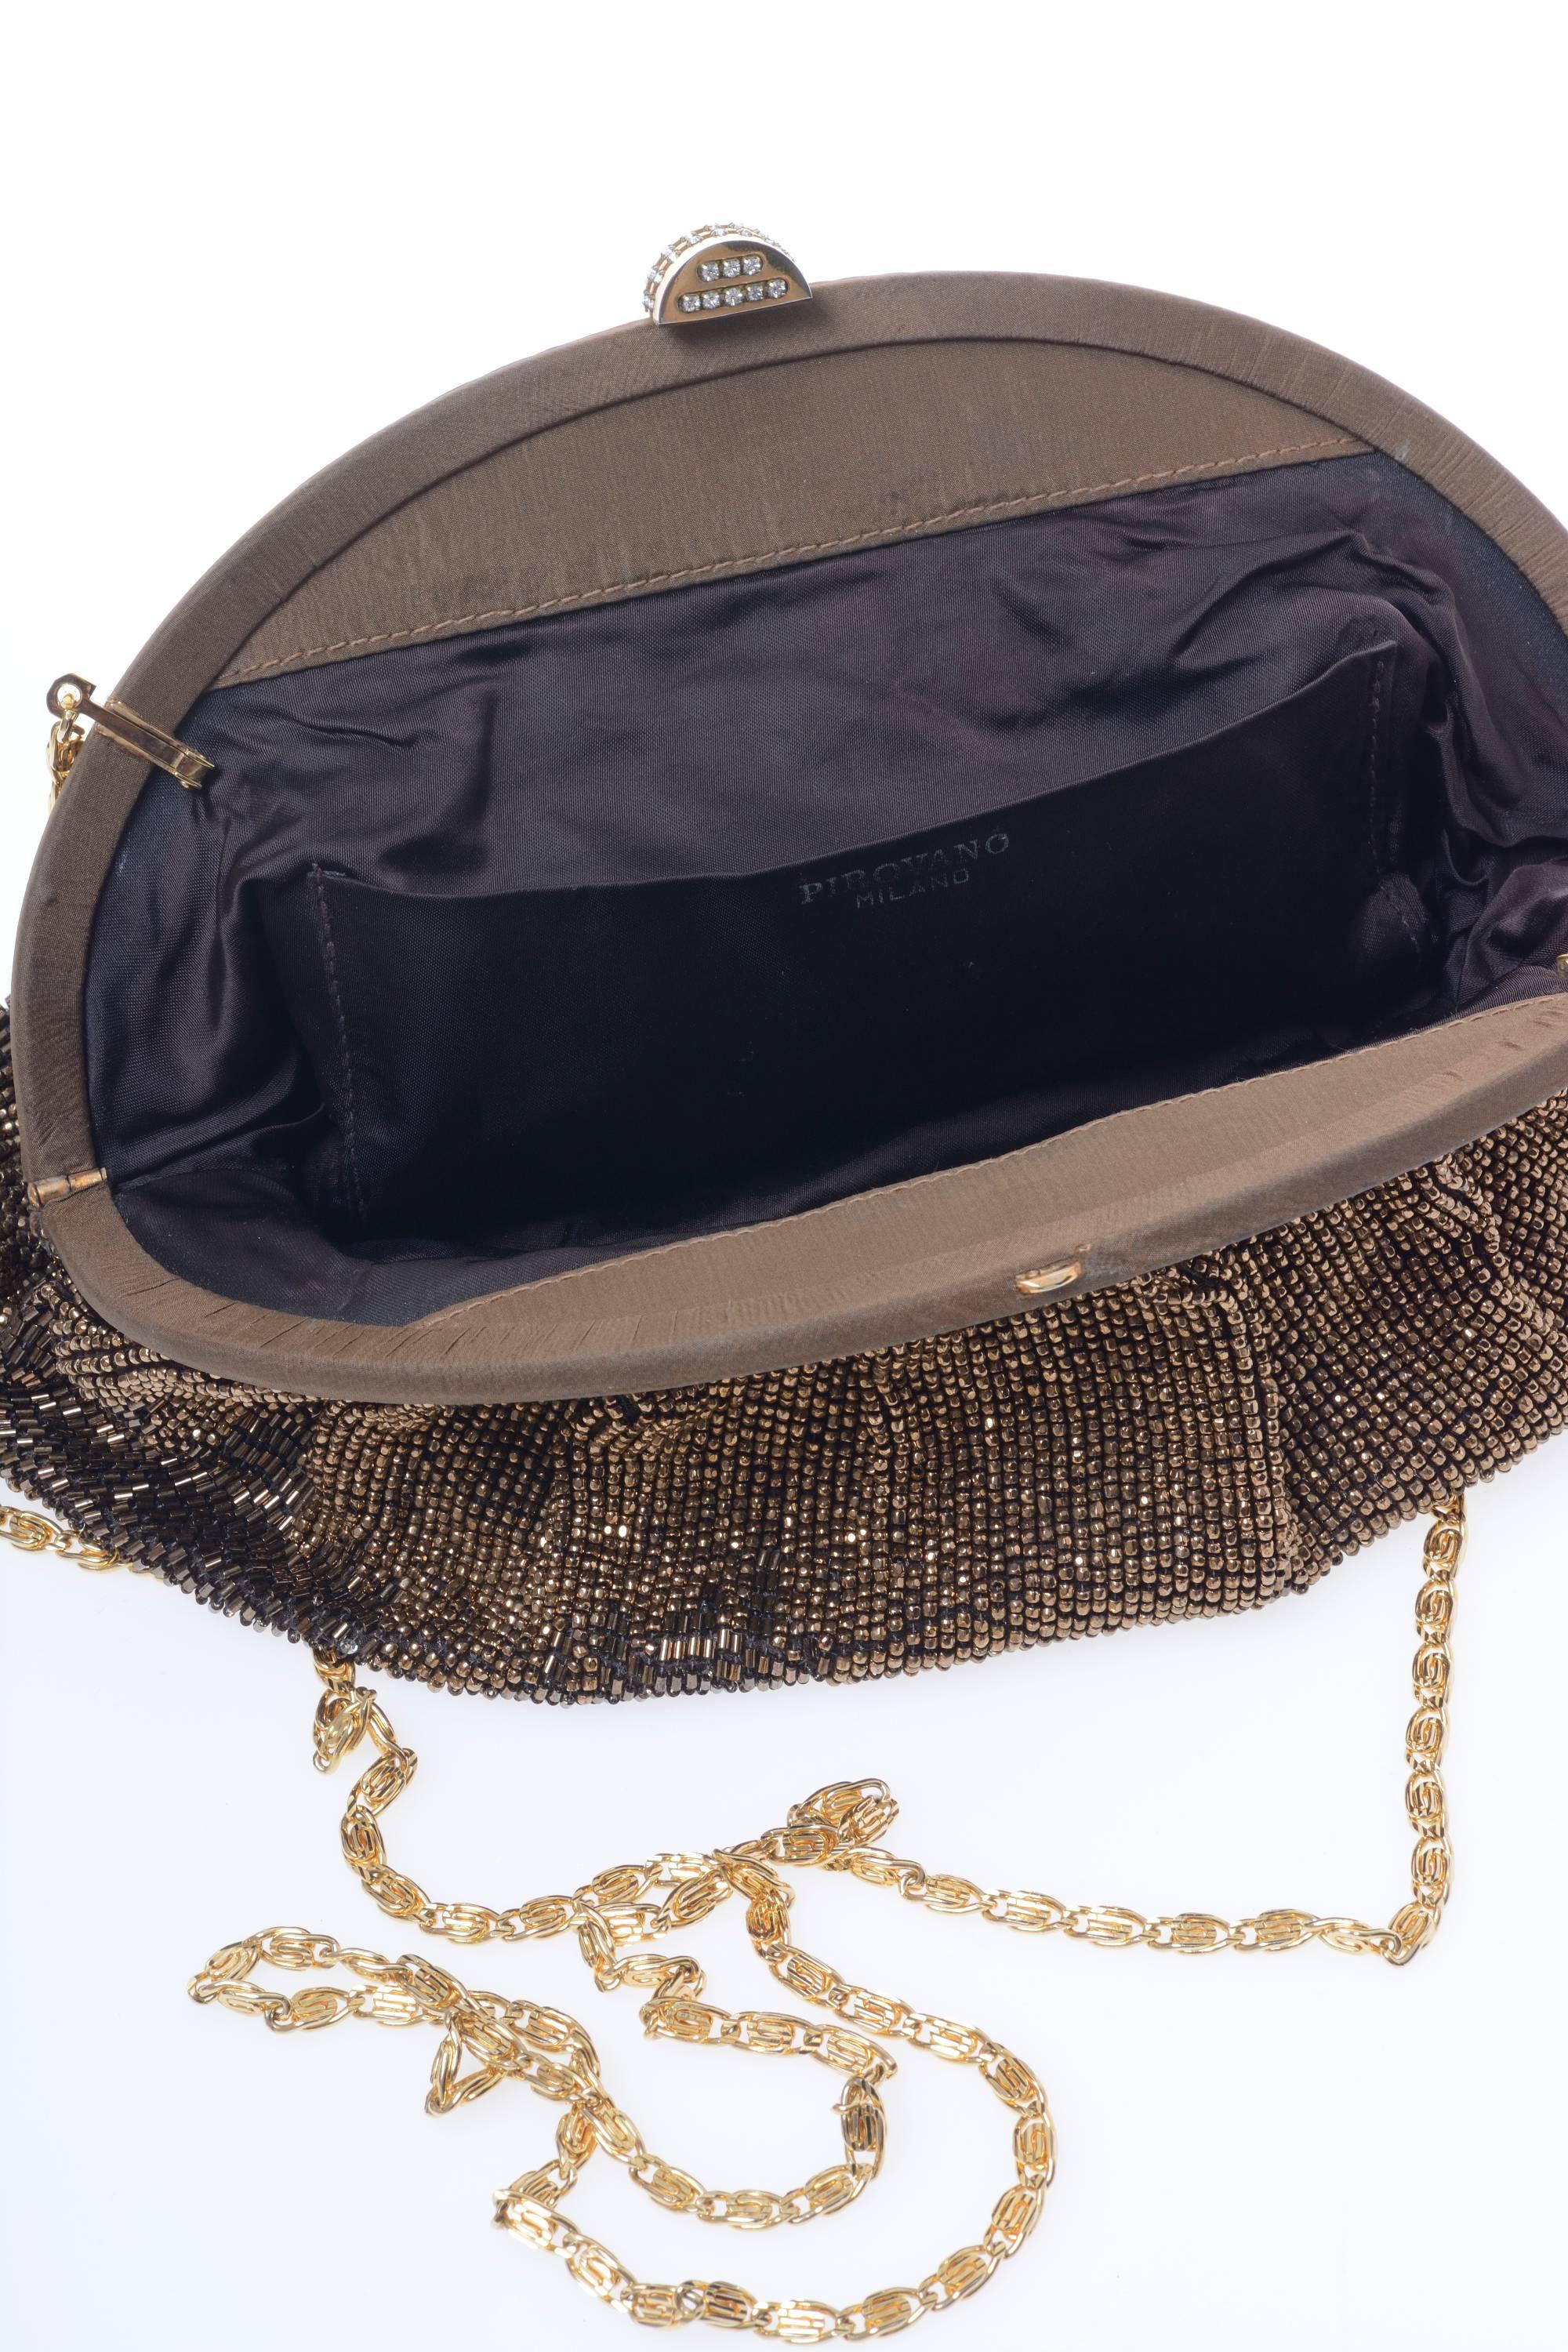 This 1960s amazing clutch bag has a gold chain shoulder strap that could be hidden inside, the bag is made of taffeta textile totally embroidered with old gold seed beads, a pocket inside and minaudière closure with silver gems details on. It's